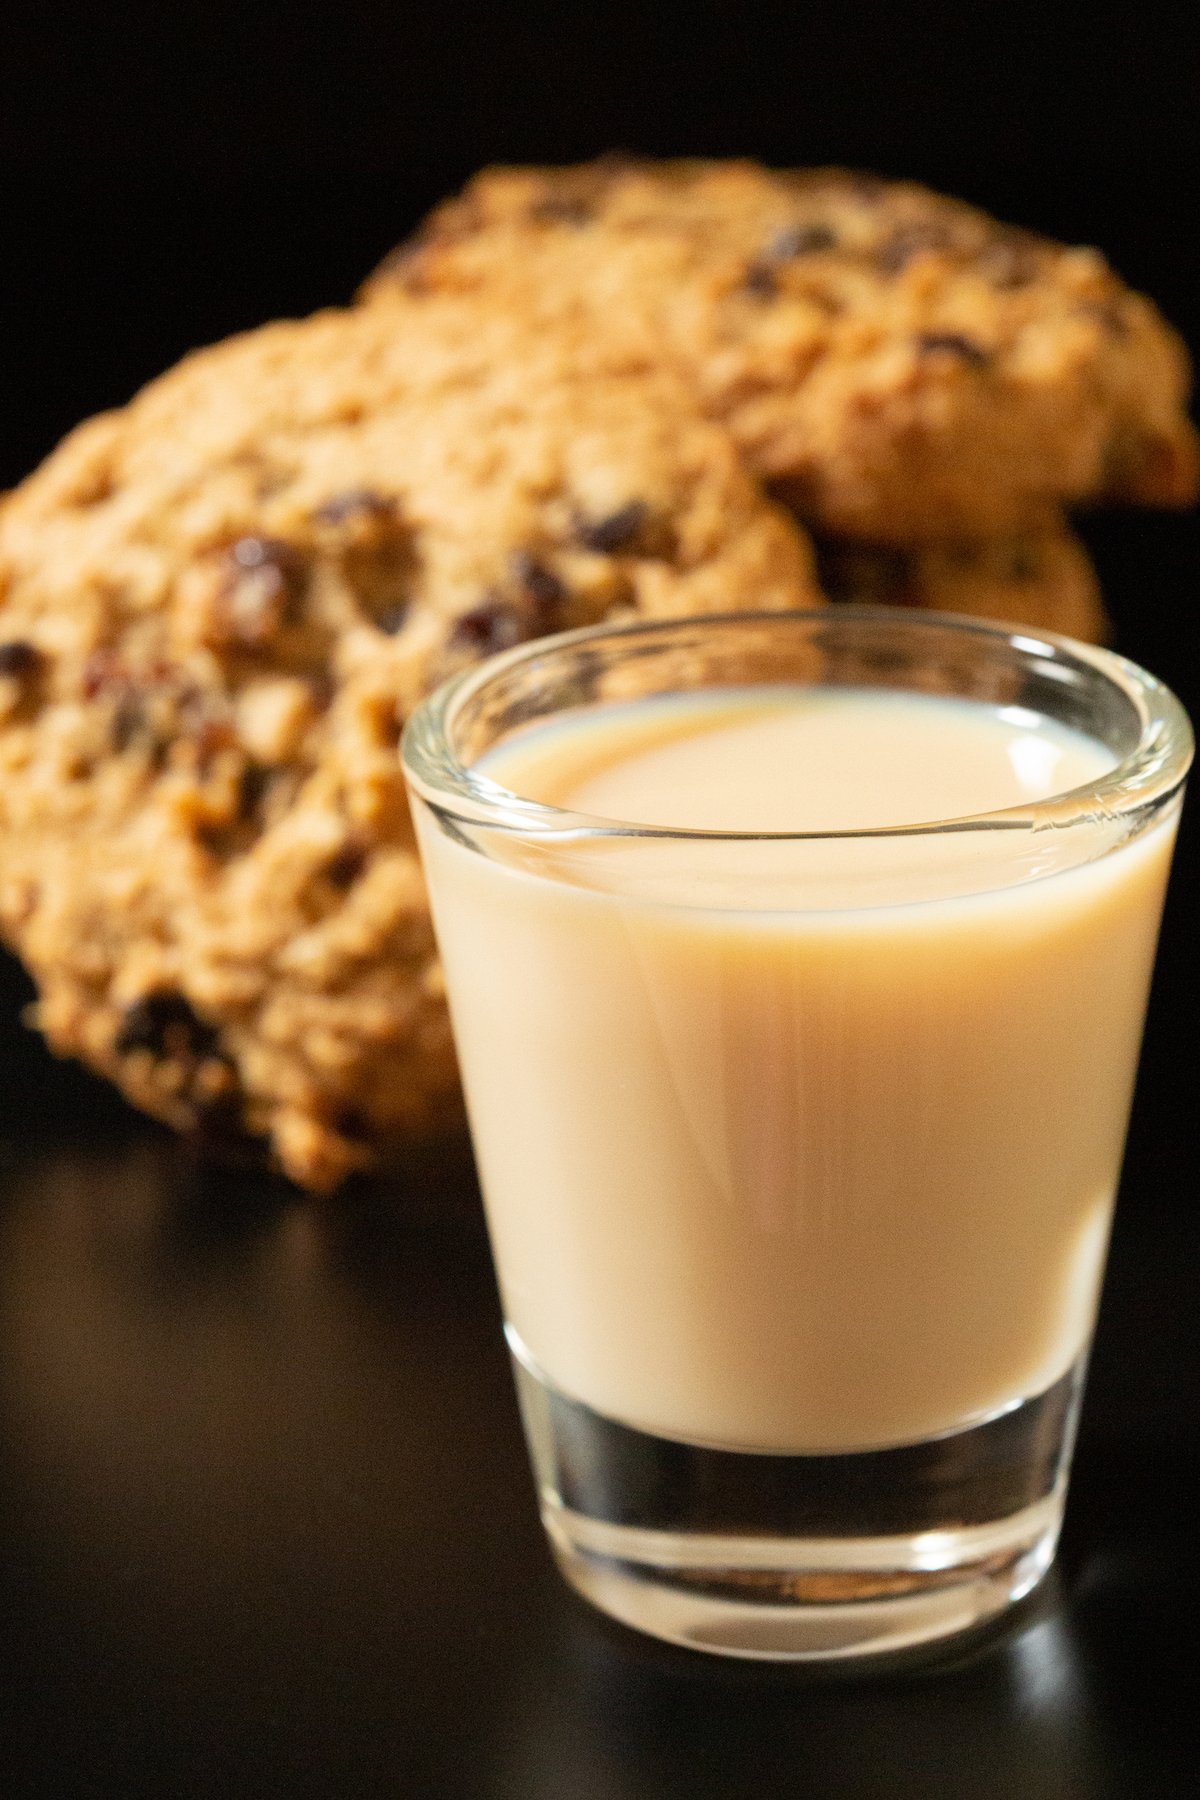 A shot glass filled with a creamy brown oatmeal cookie shot. Cookies are out of focus in the background.